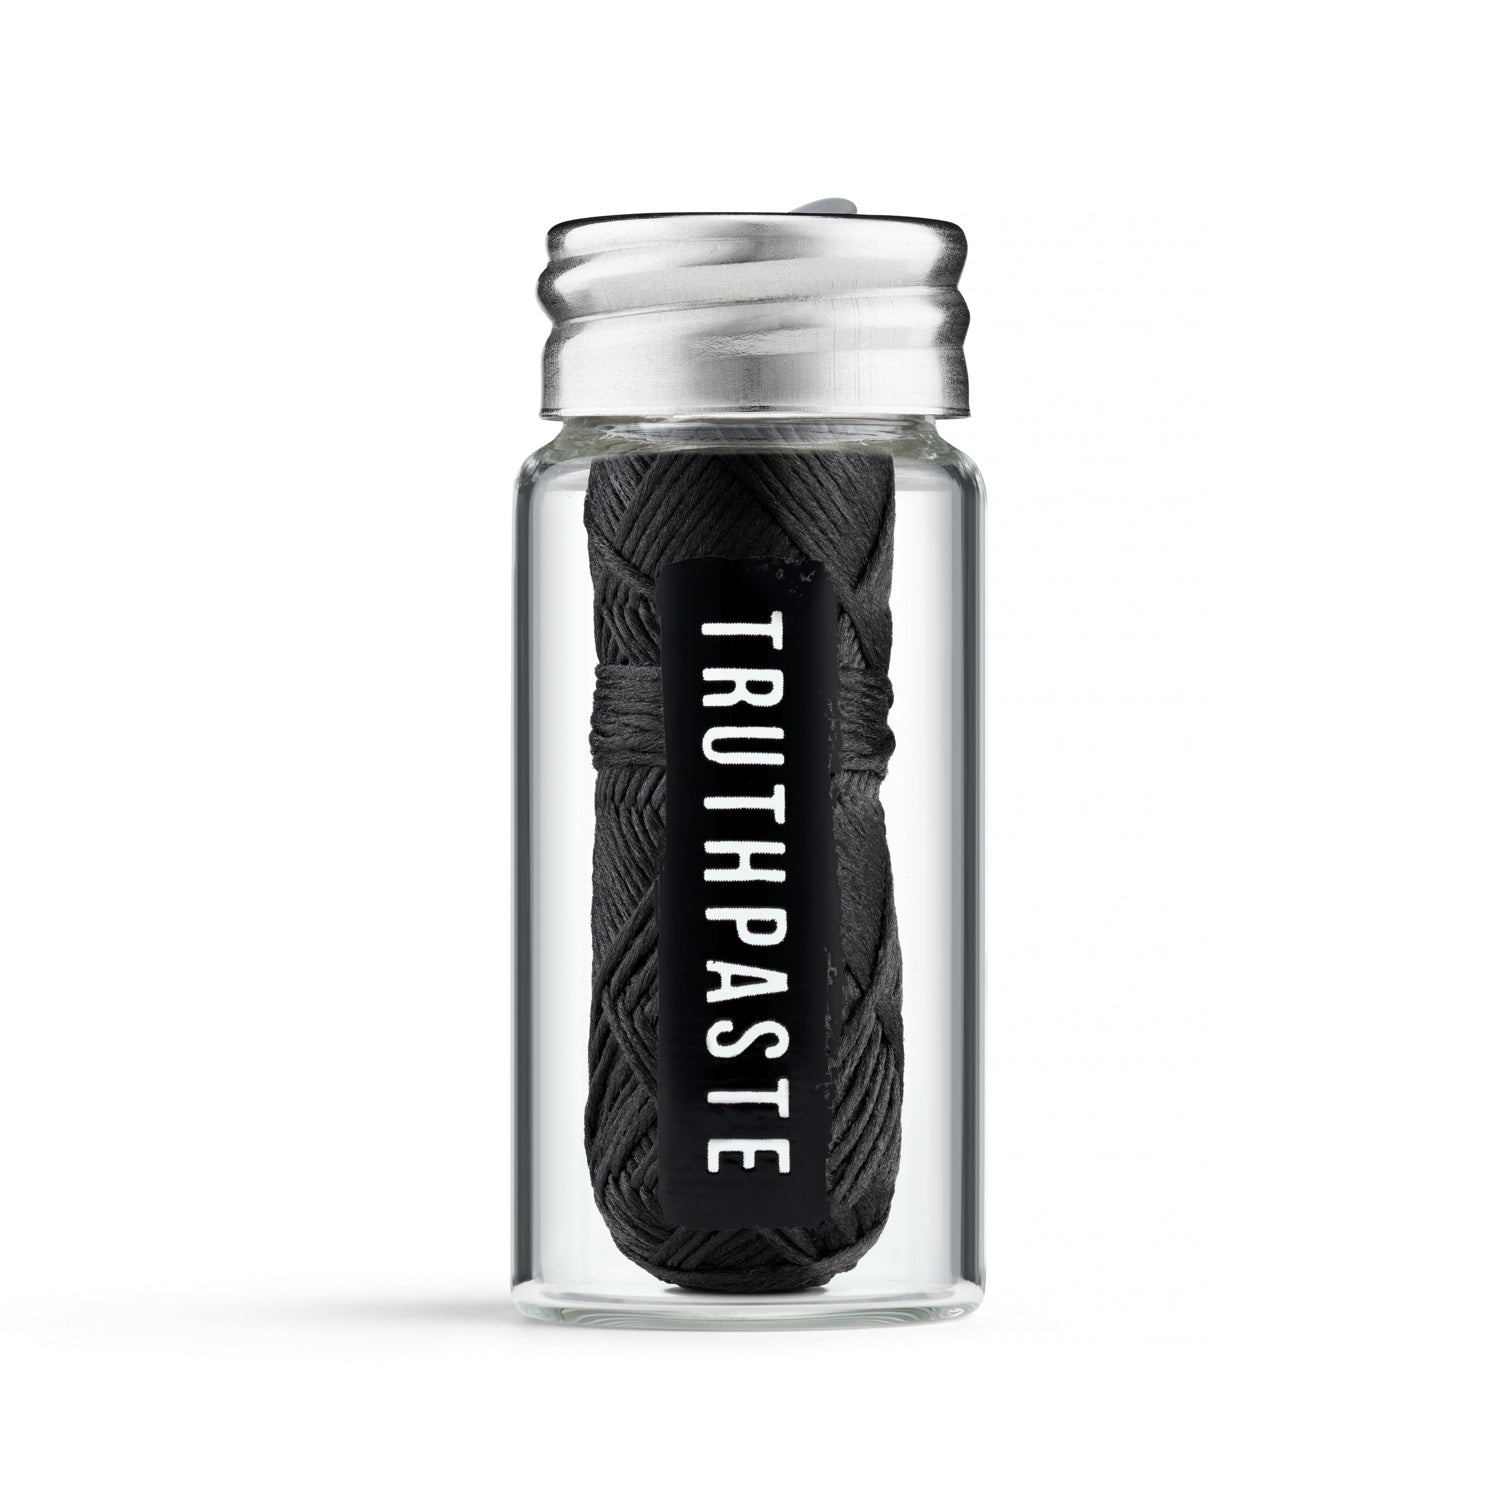 Bamboo Charcoal Floss - truthpaste